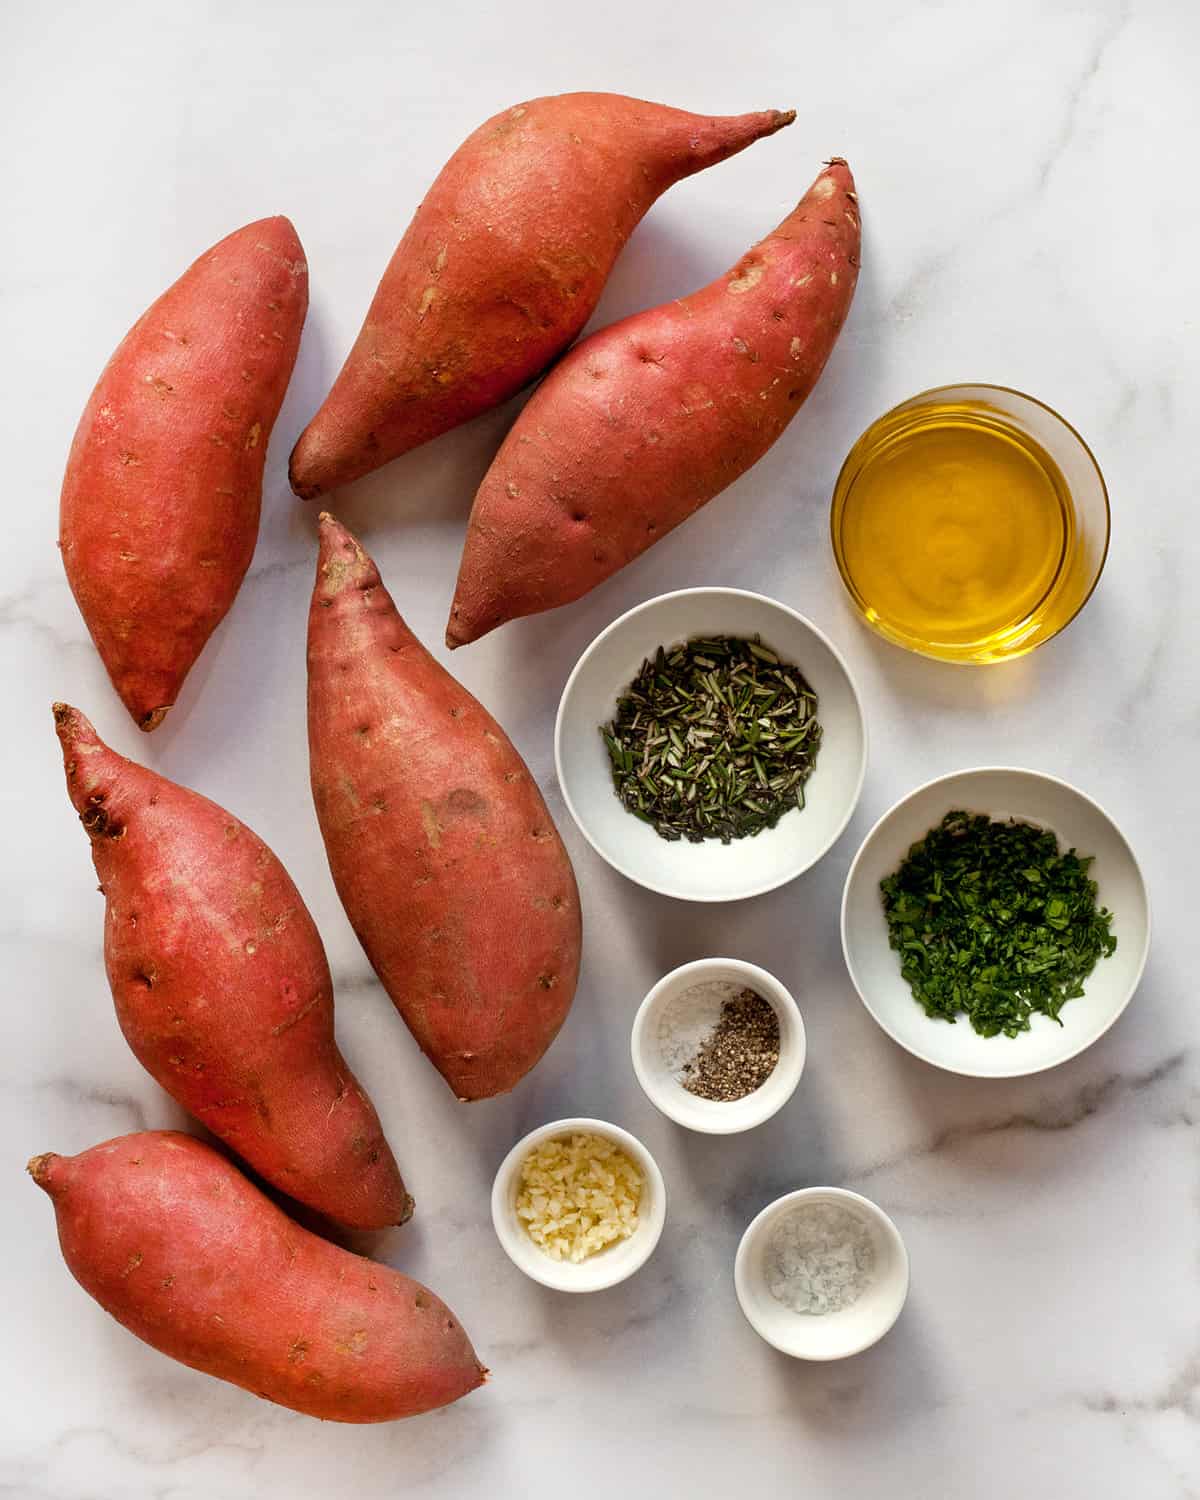 Ingredients including sweet potatoes, olive oil, rosemary, parsley, garlic, salt and pepper.